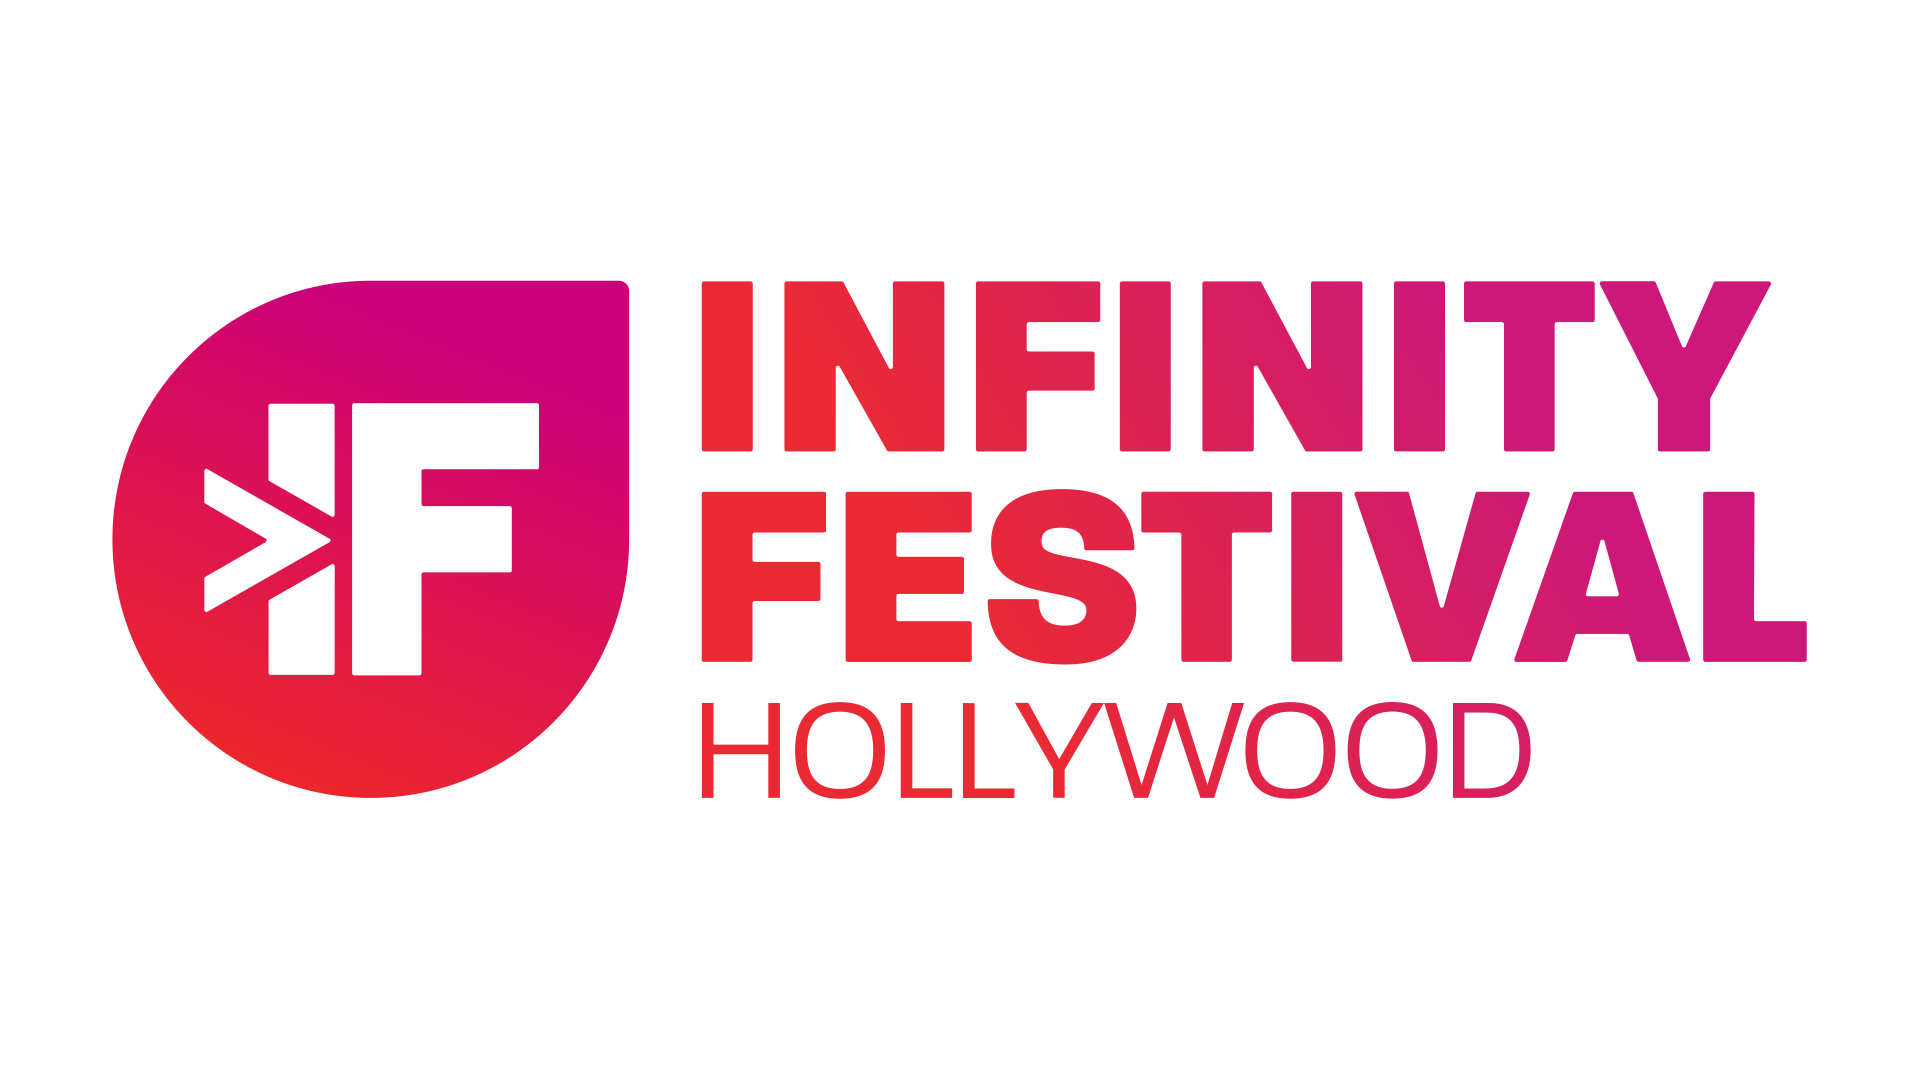 INFINITY FESTIVAL EXPANDS IN ITS SECOND YEAR, TO BE HELD AT GOYA STUDIOS AND DREAM HOTEL IN HOLLYWOOD